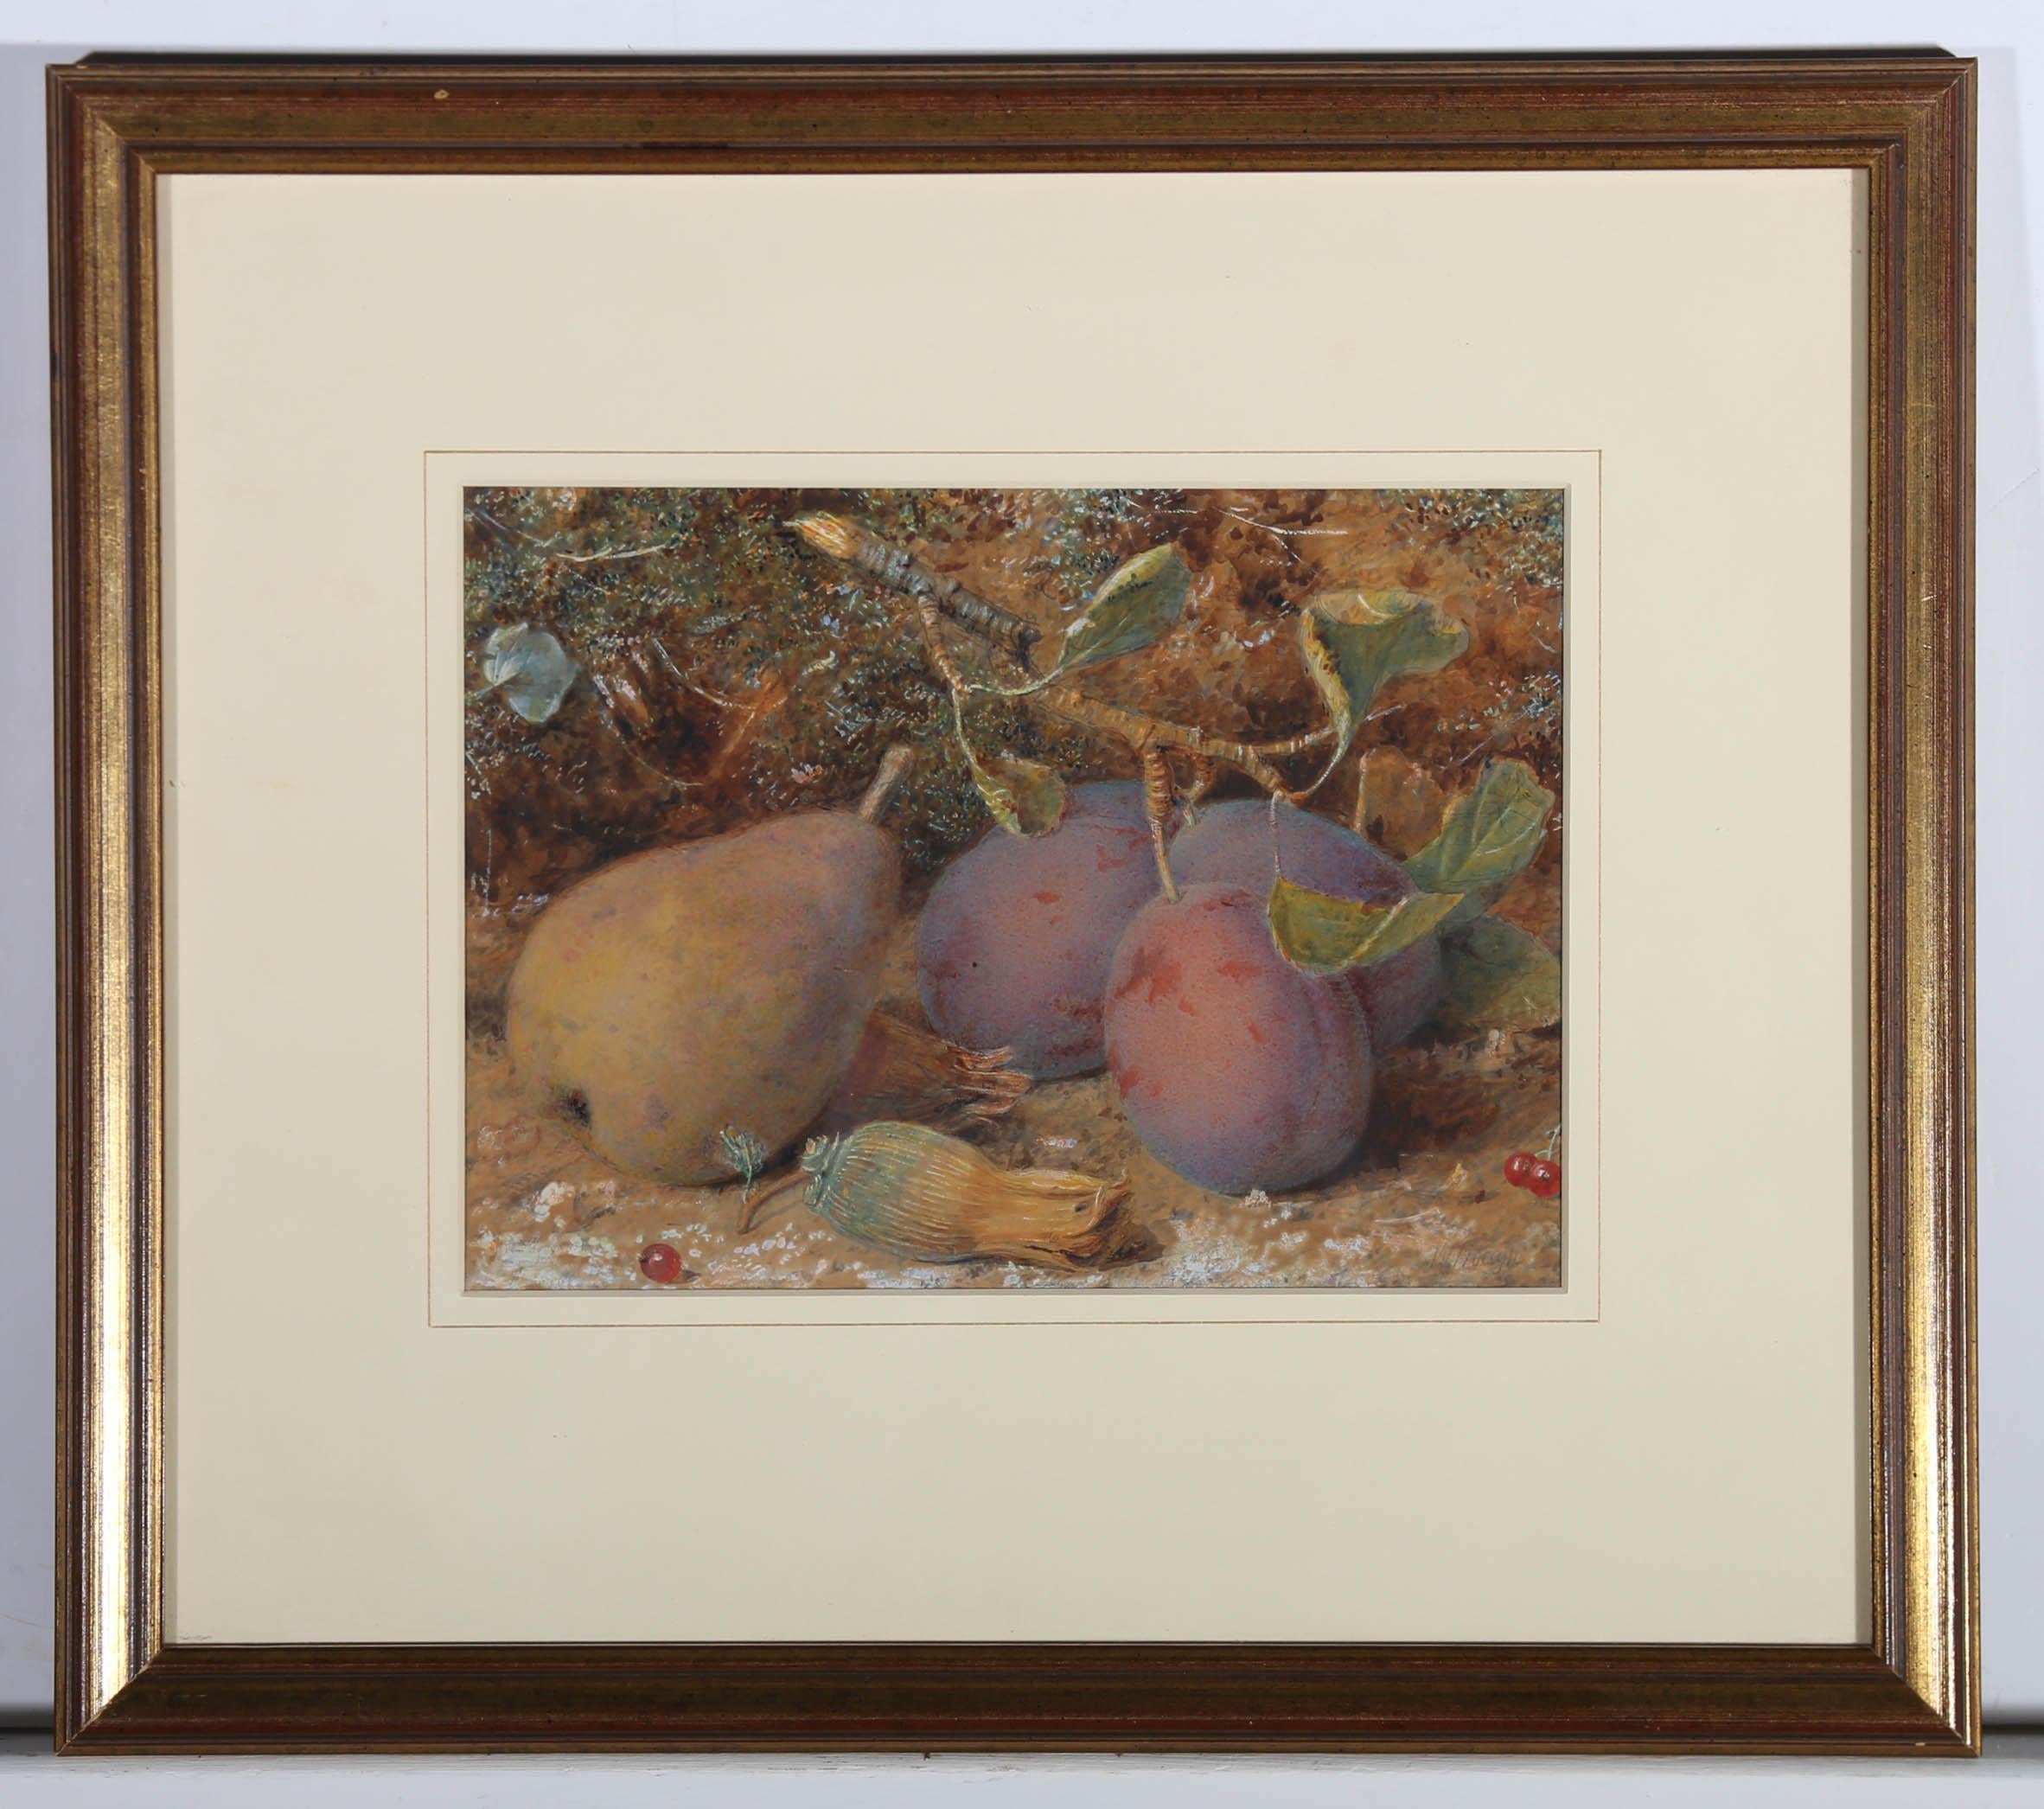 William Hough (1819 - 1897) - Mid 19th Century Watercolour, September's Bounty 1